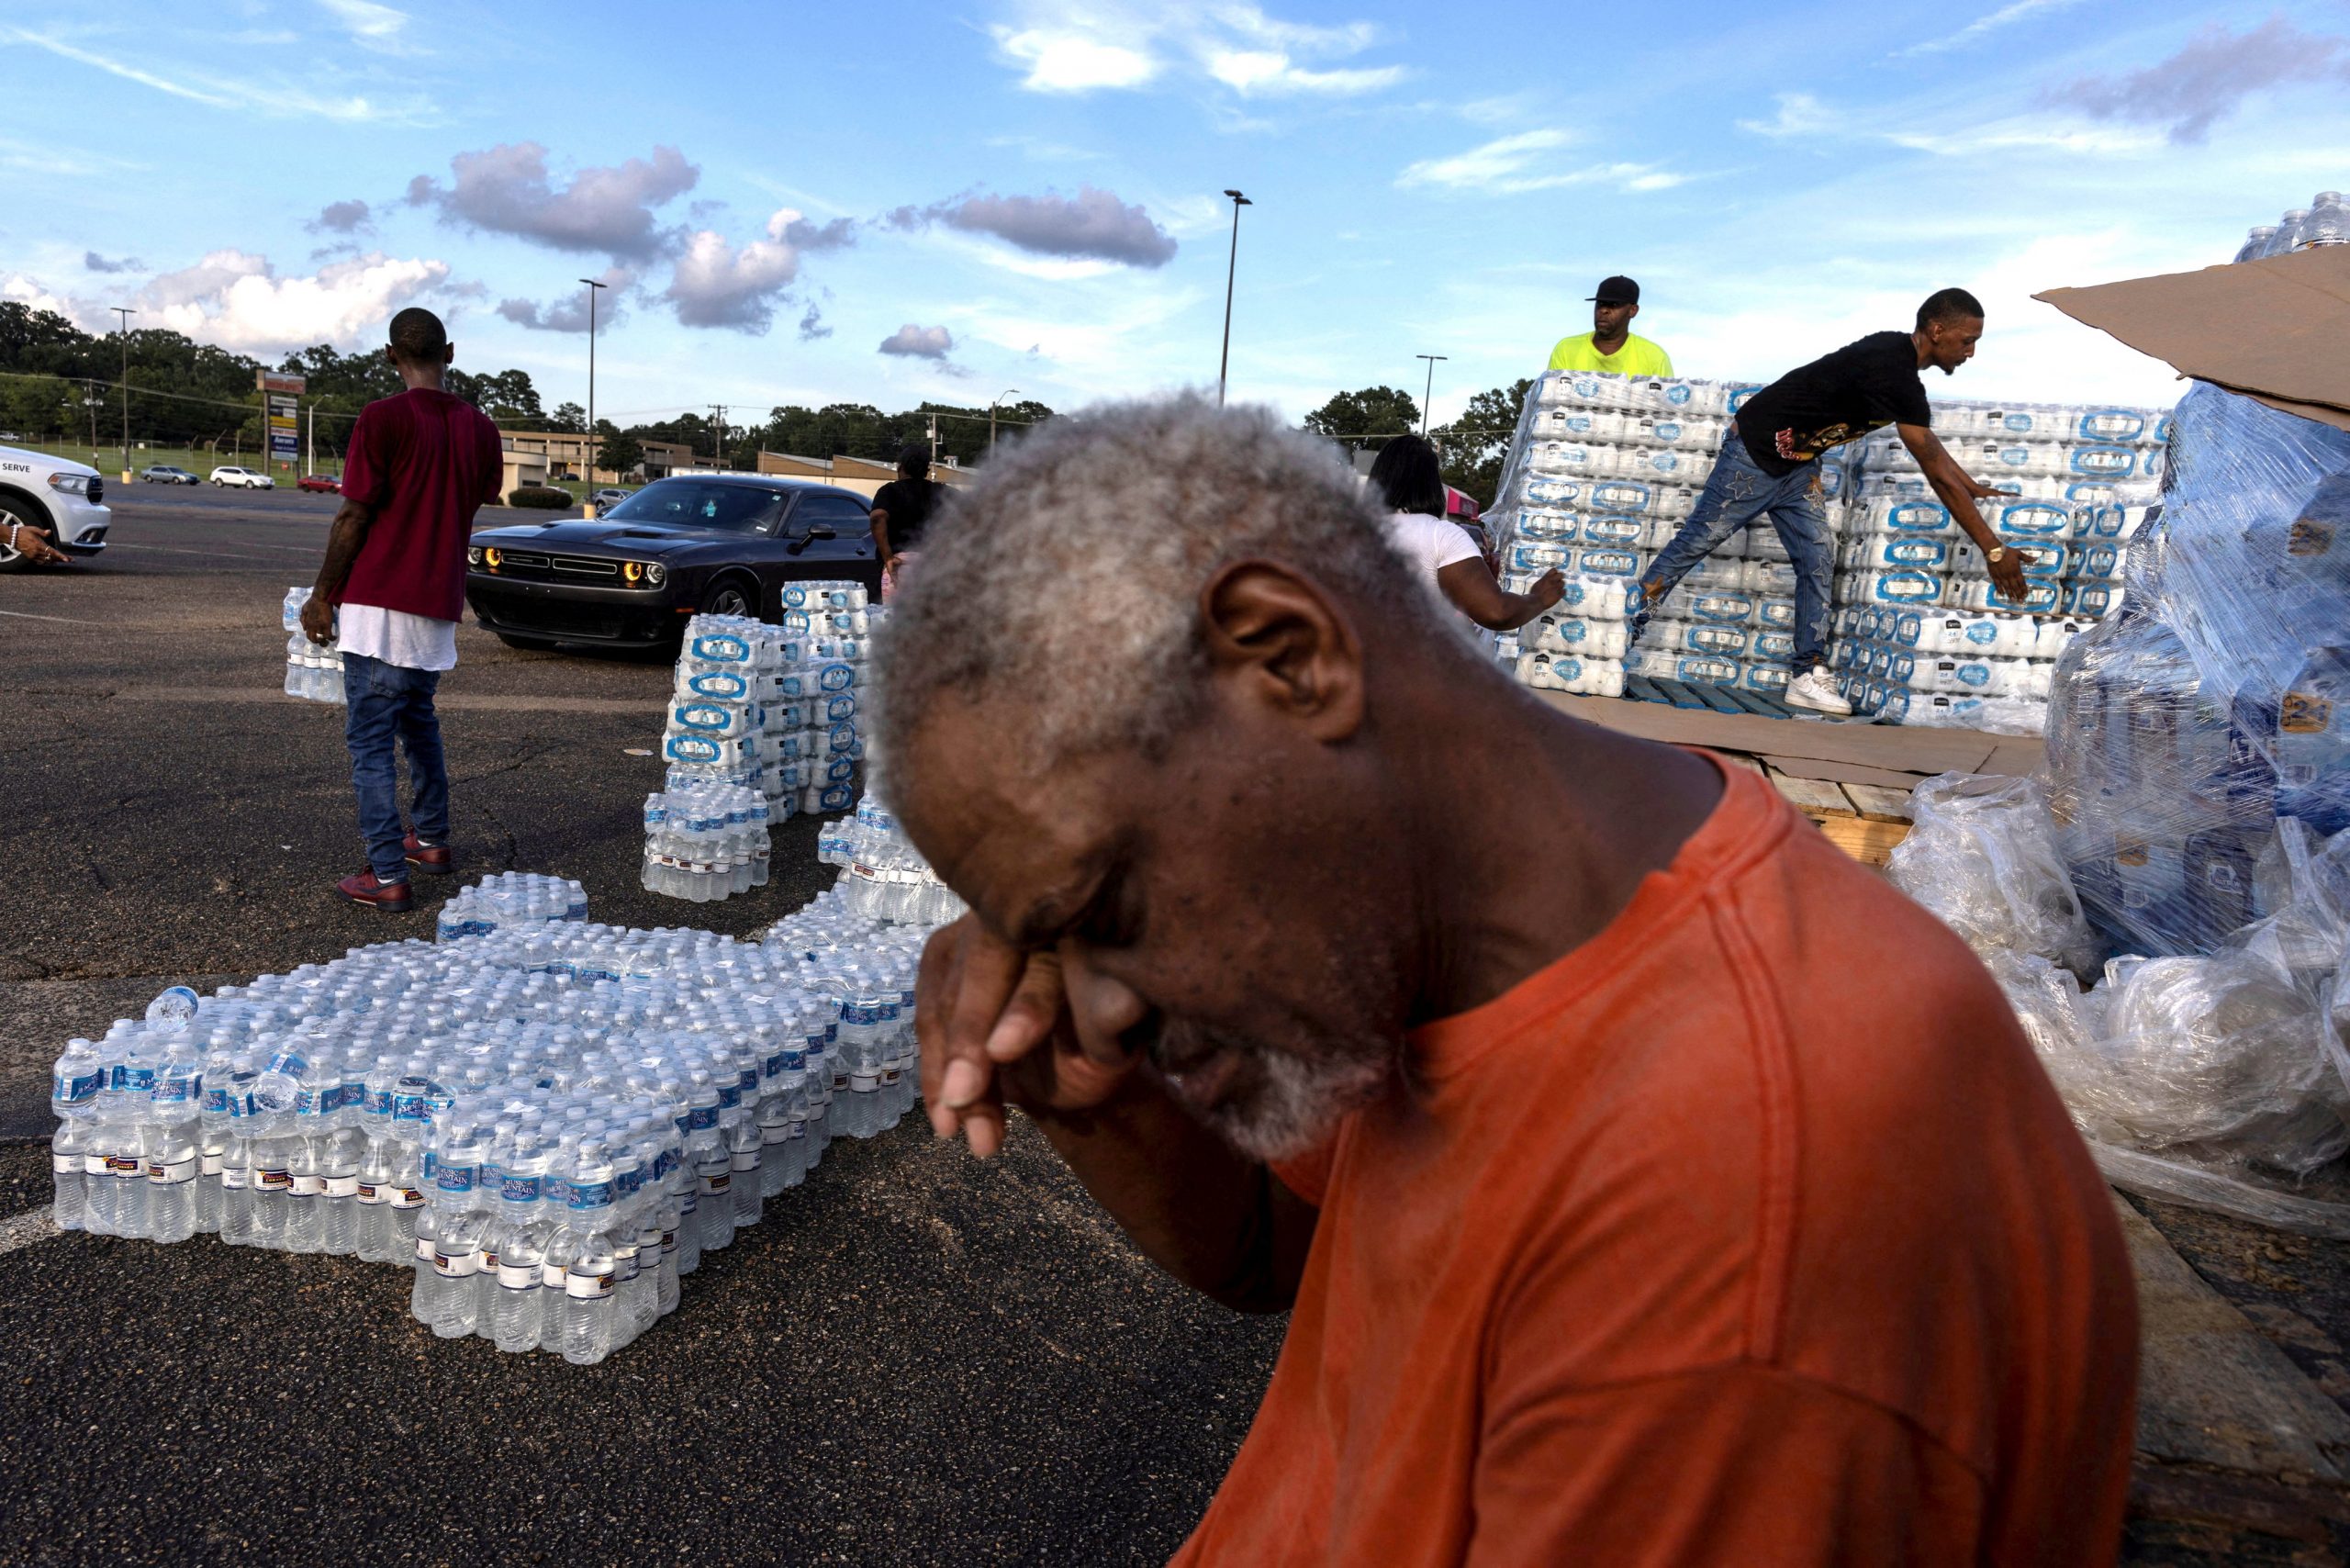 In the center foreground, a Black person with gray close shaved hair wearing an orange t shirt wipes their face with their hand. In the background are pallets of water bottles and people are moving them.